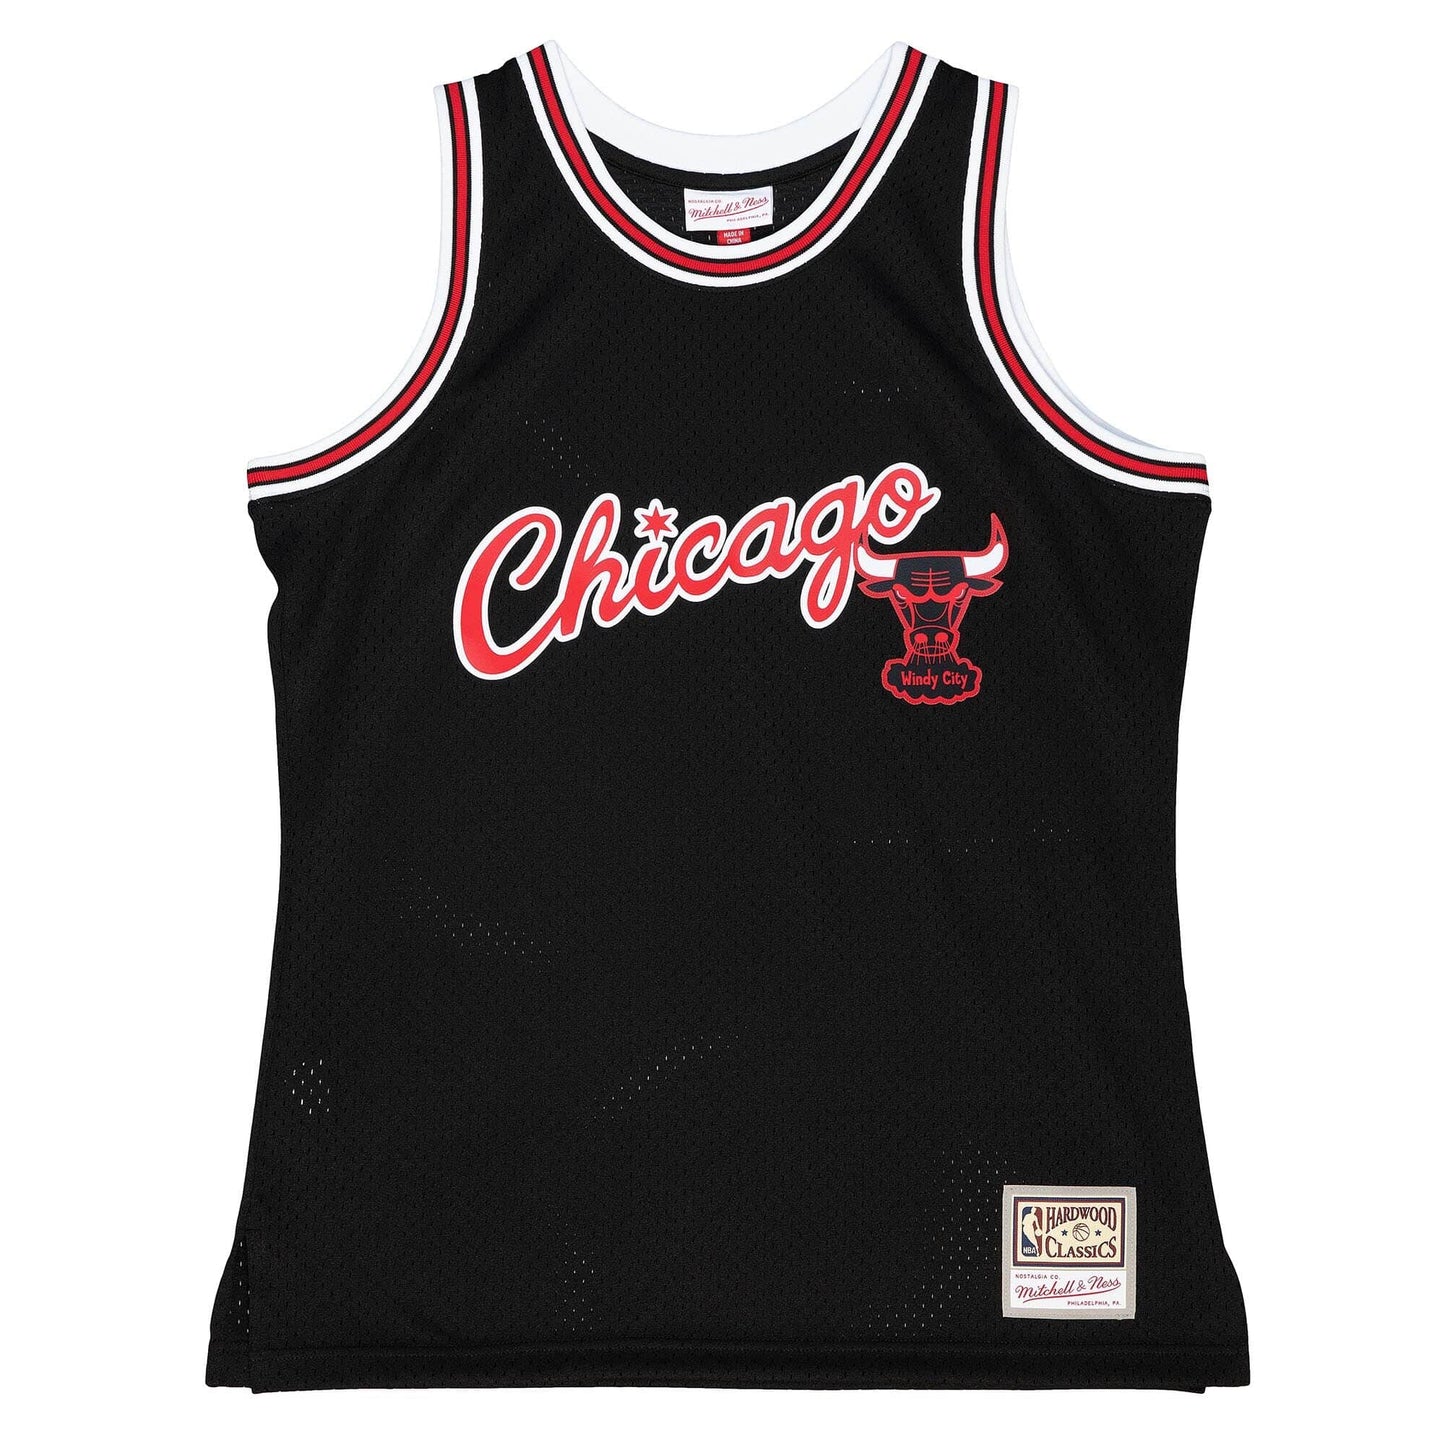 My Towns Leaders Fashion Jersey Chicago Bulls